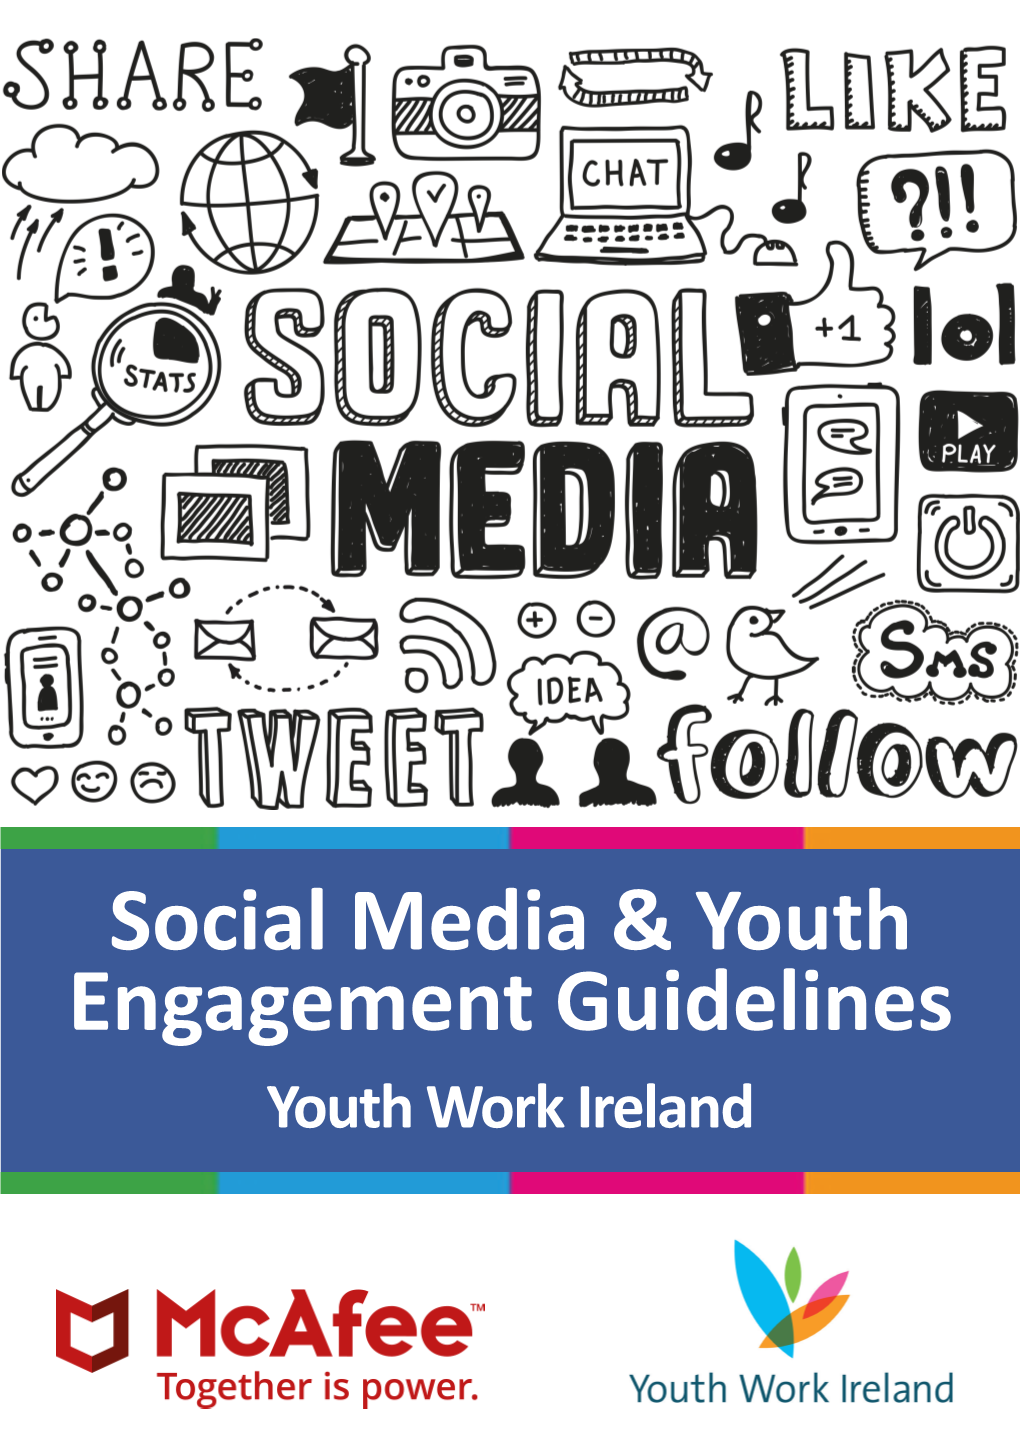 Social Media & Youth Engagement Guidelines